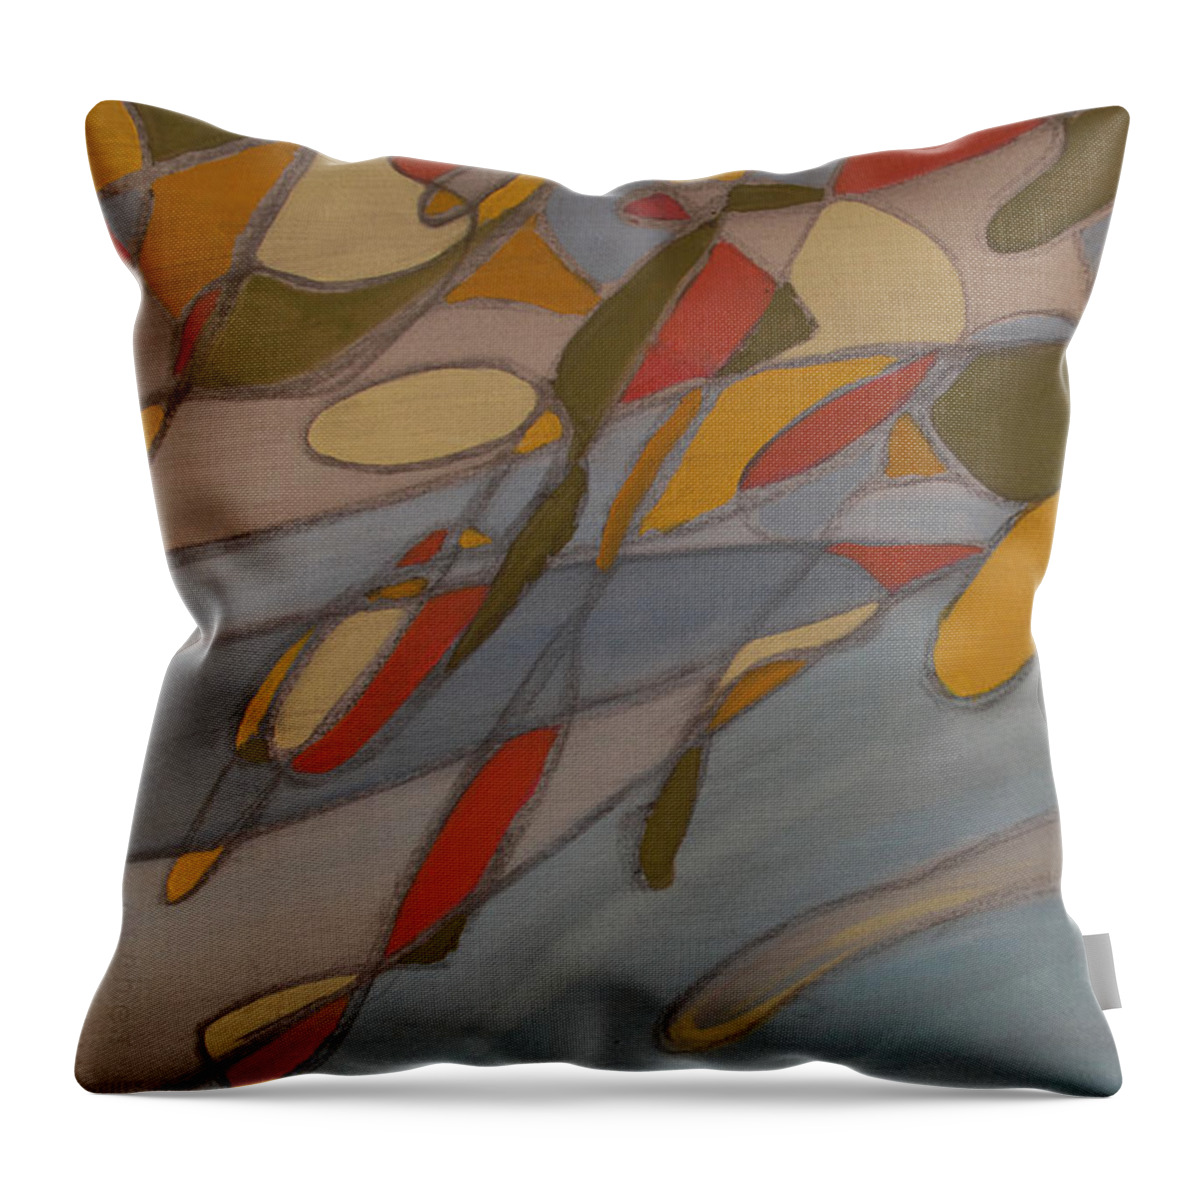 Abstract Throw Pillow featuring the painting Confluence by Heidi E Nelson